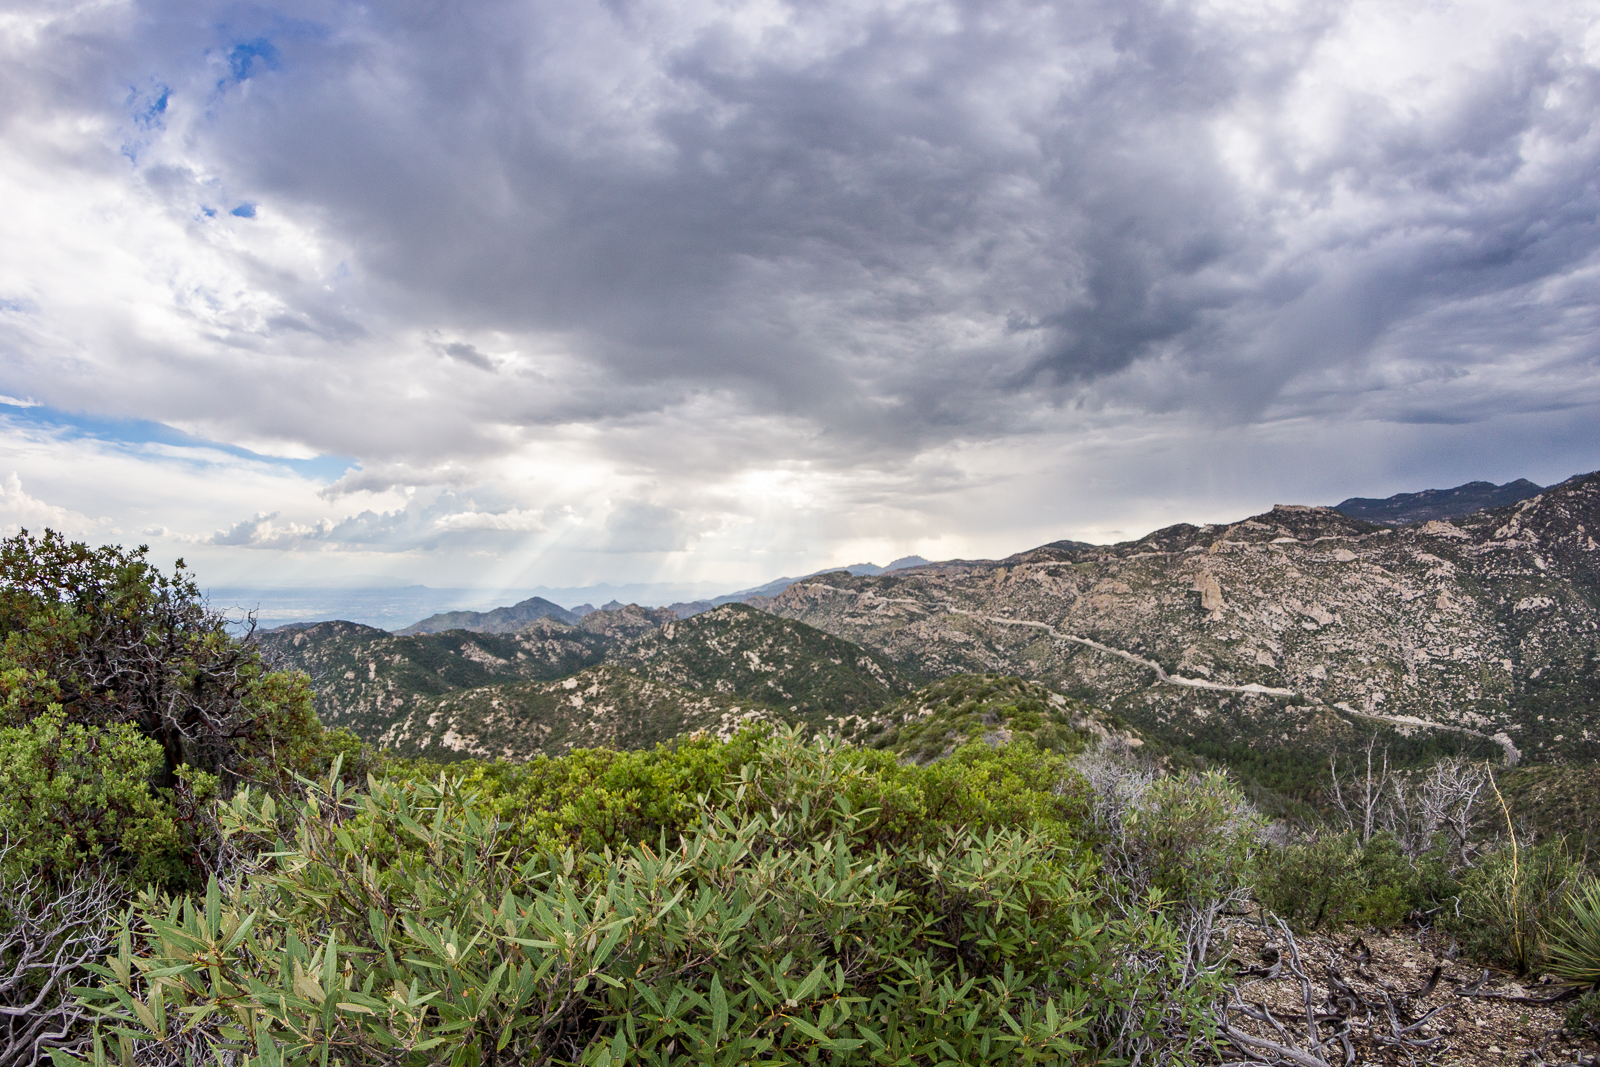 Looking across Bear Canyon from Point 6810 on the ridge east of Bear Canyon. August 2015.